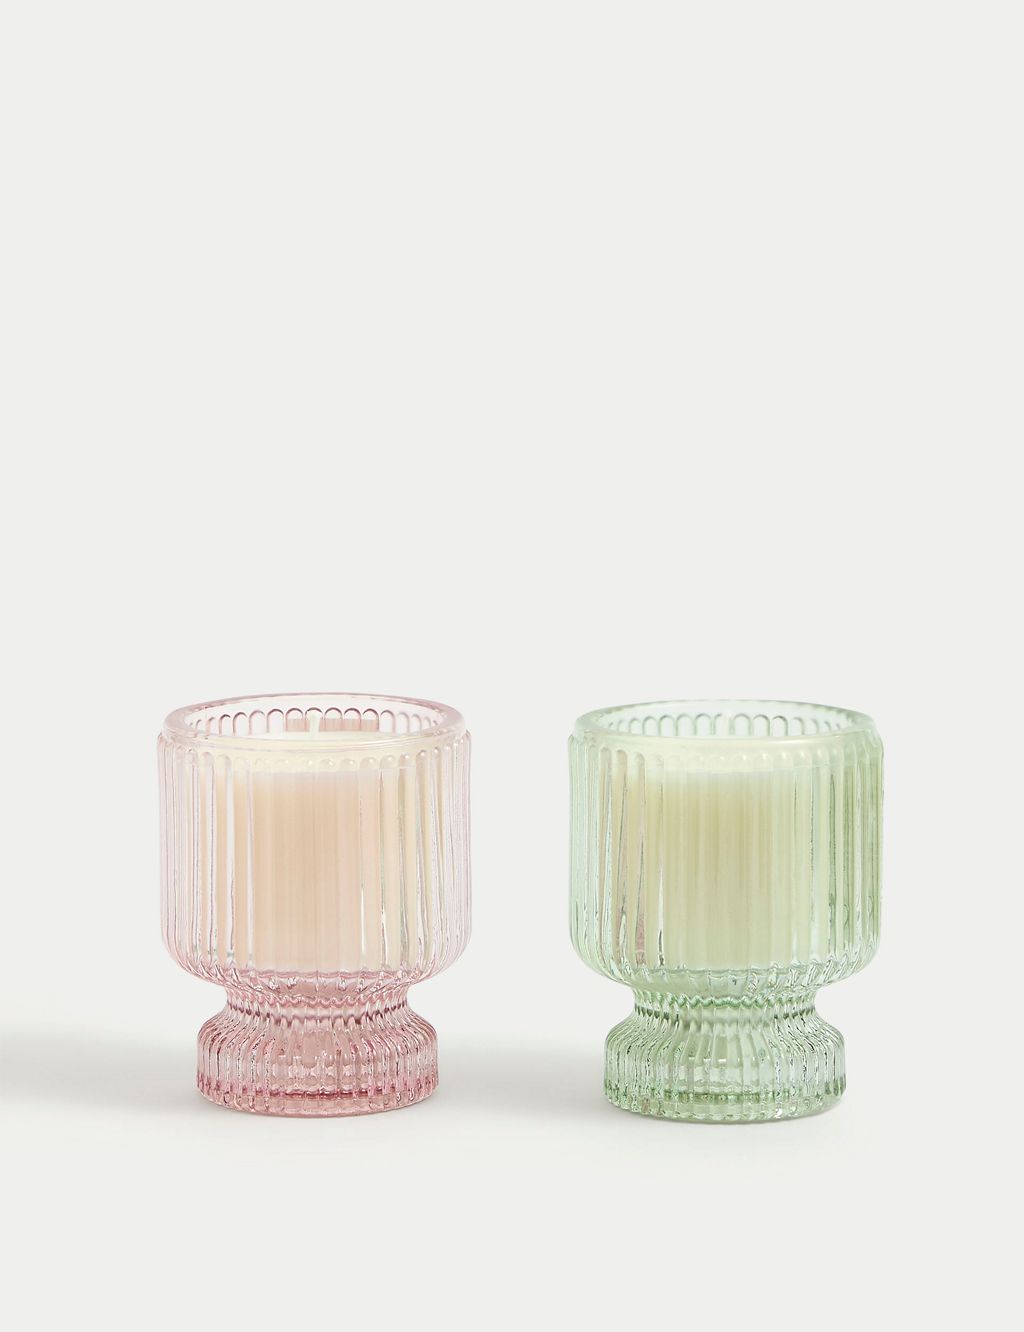 Set of 2 Ridged Glass Candles 2 of 4